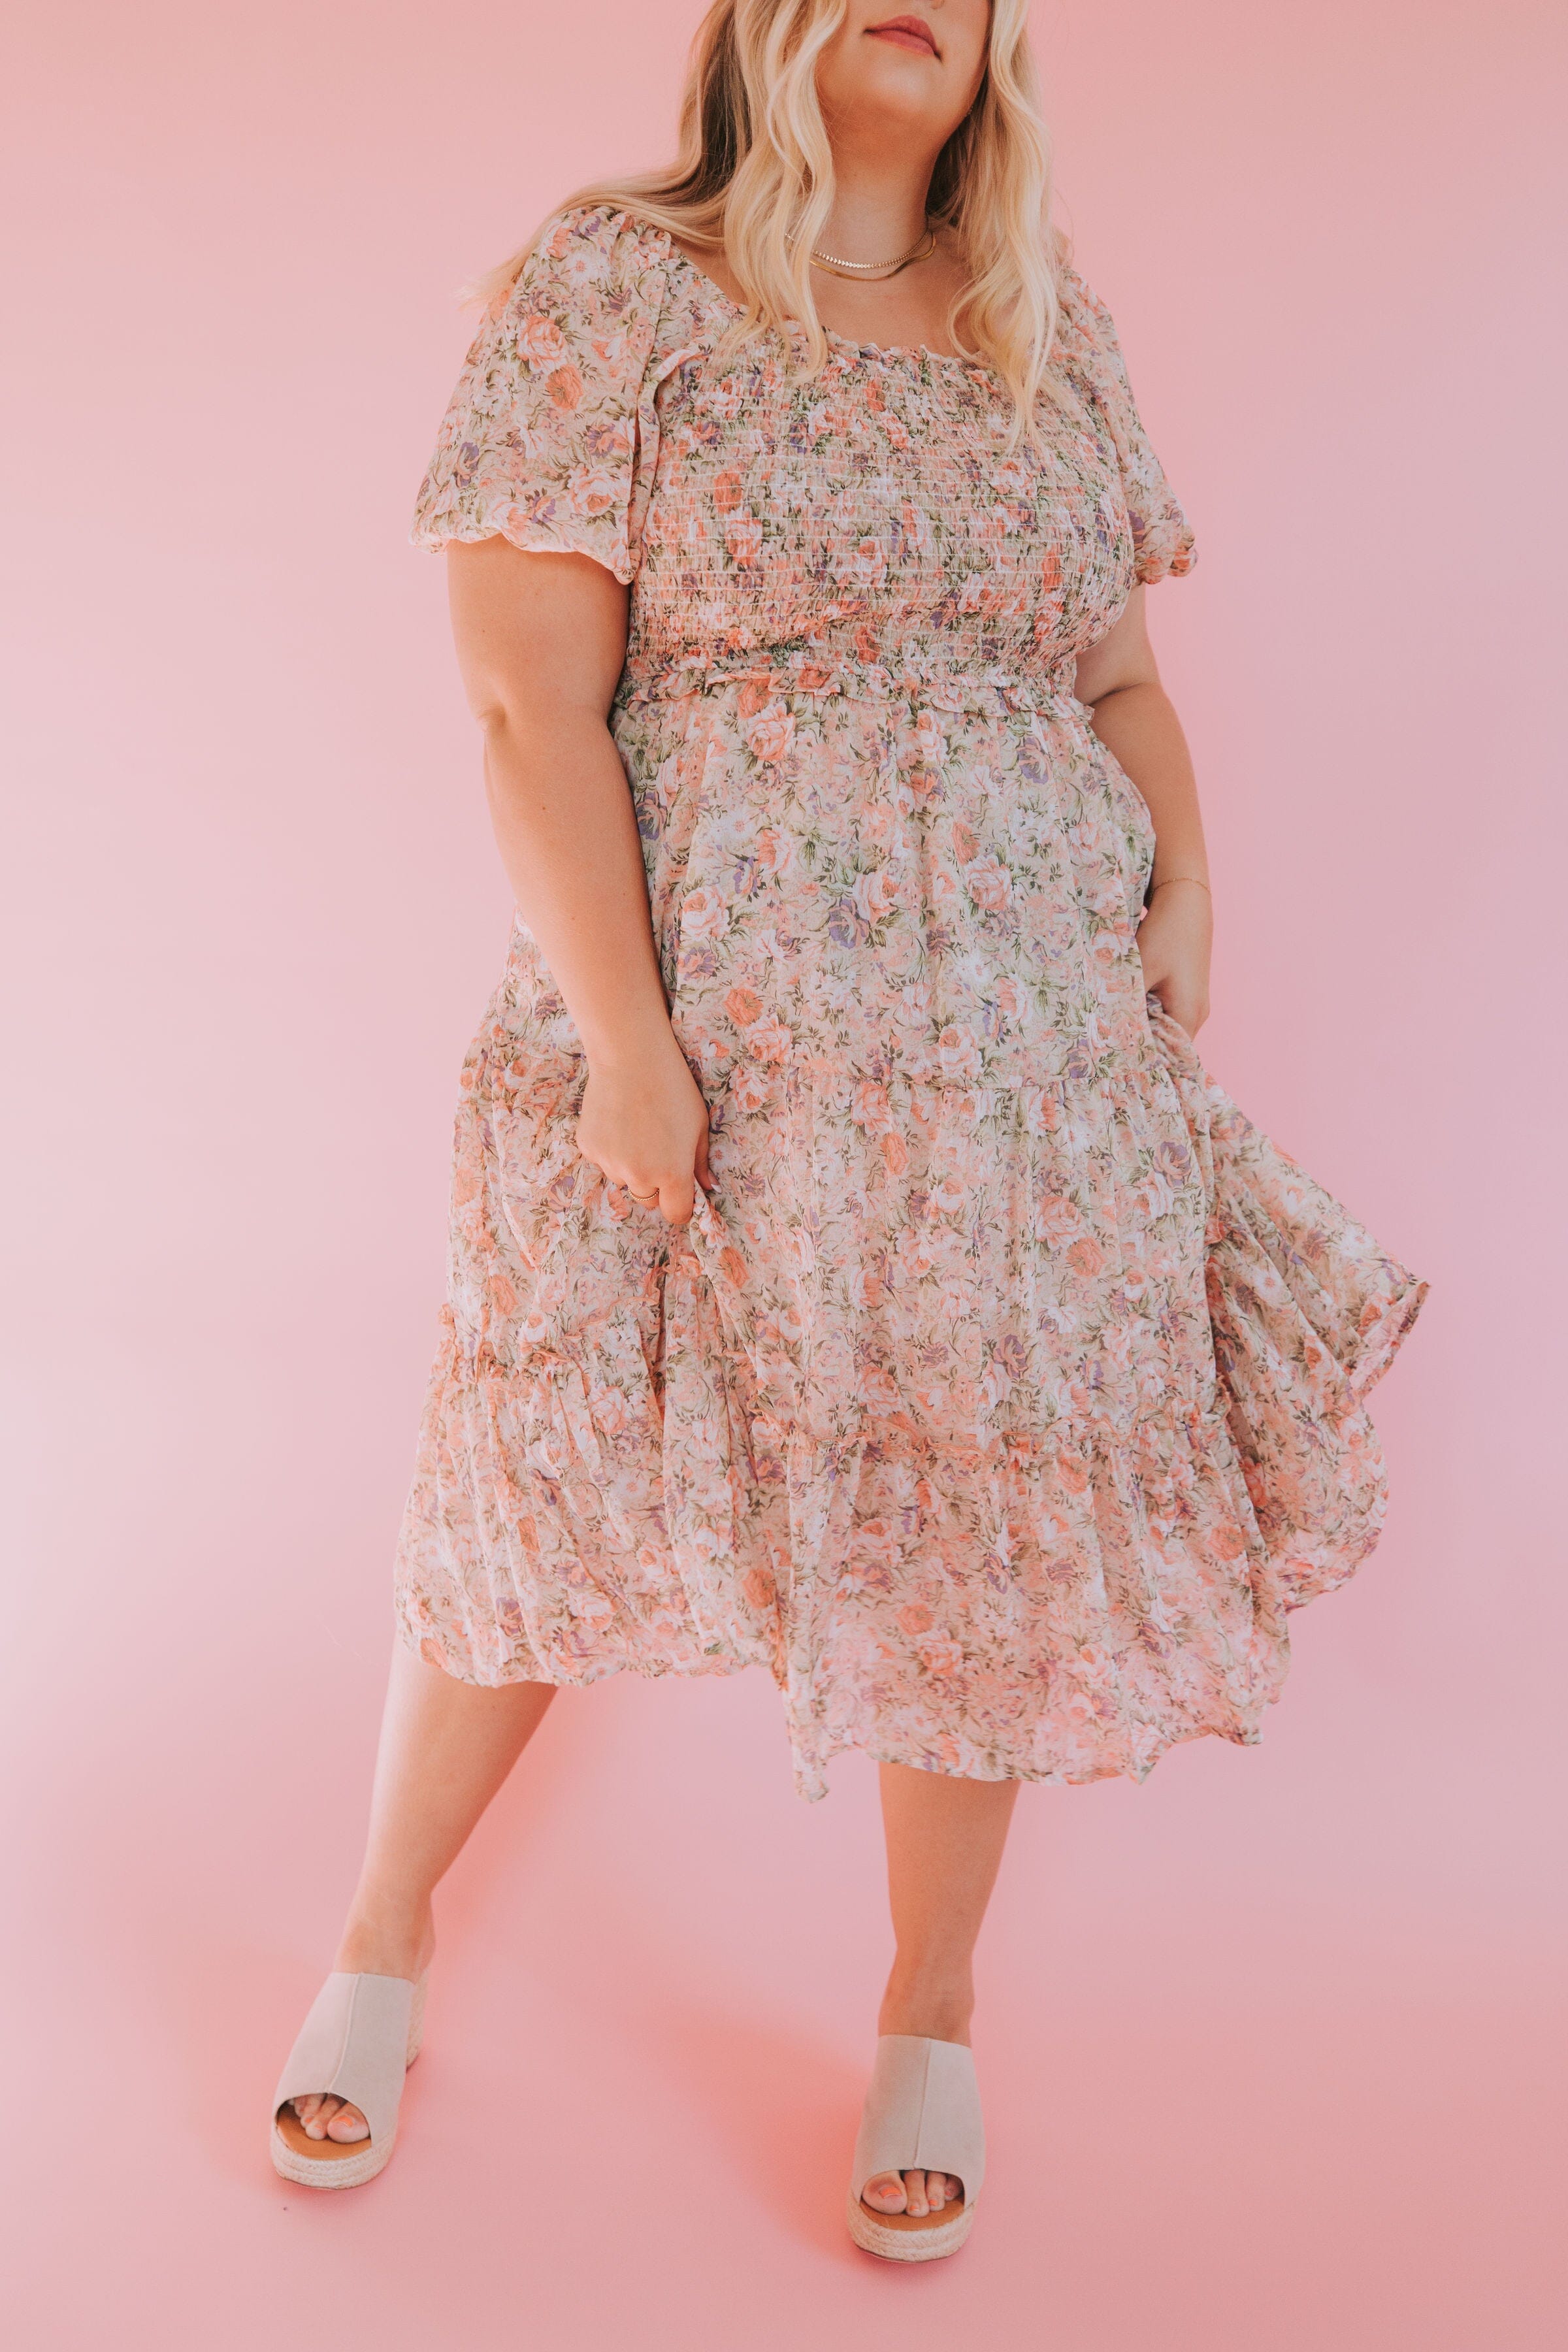 Yours Clothing - Plus Size Clothing Review - Wannabe Princess